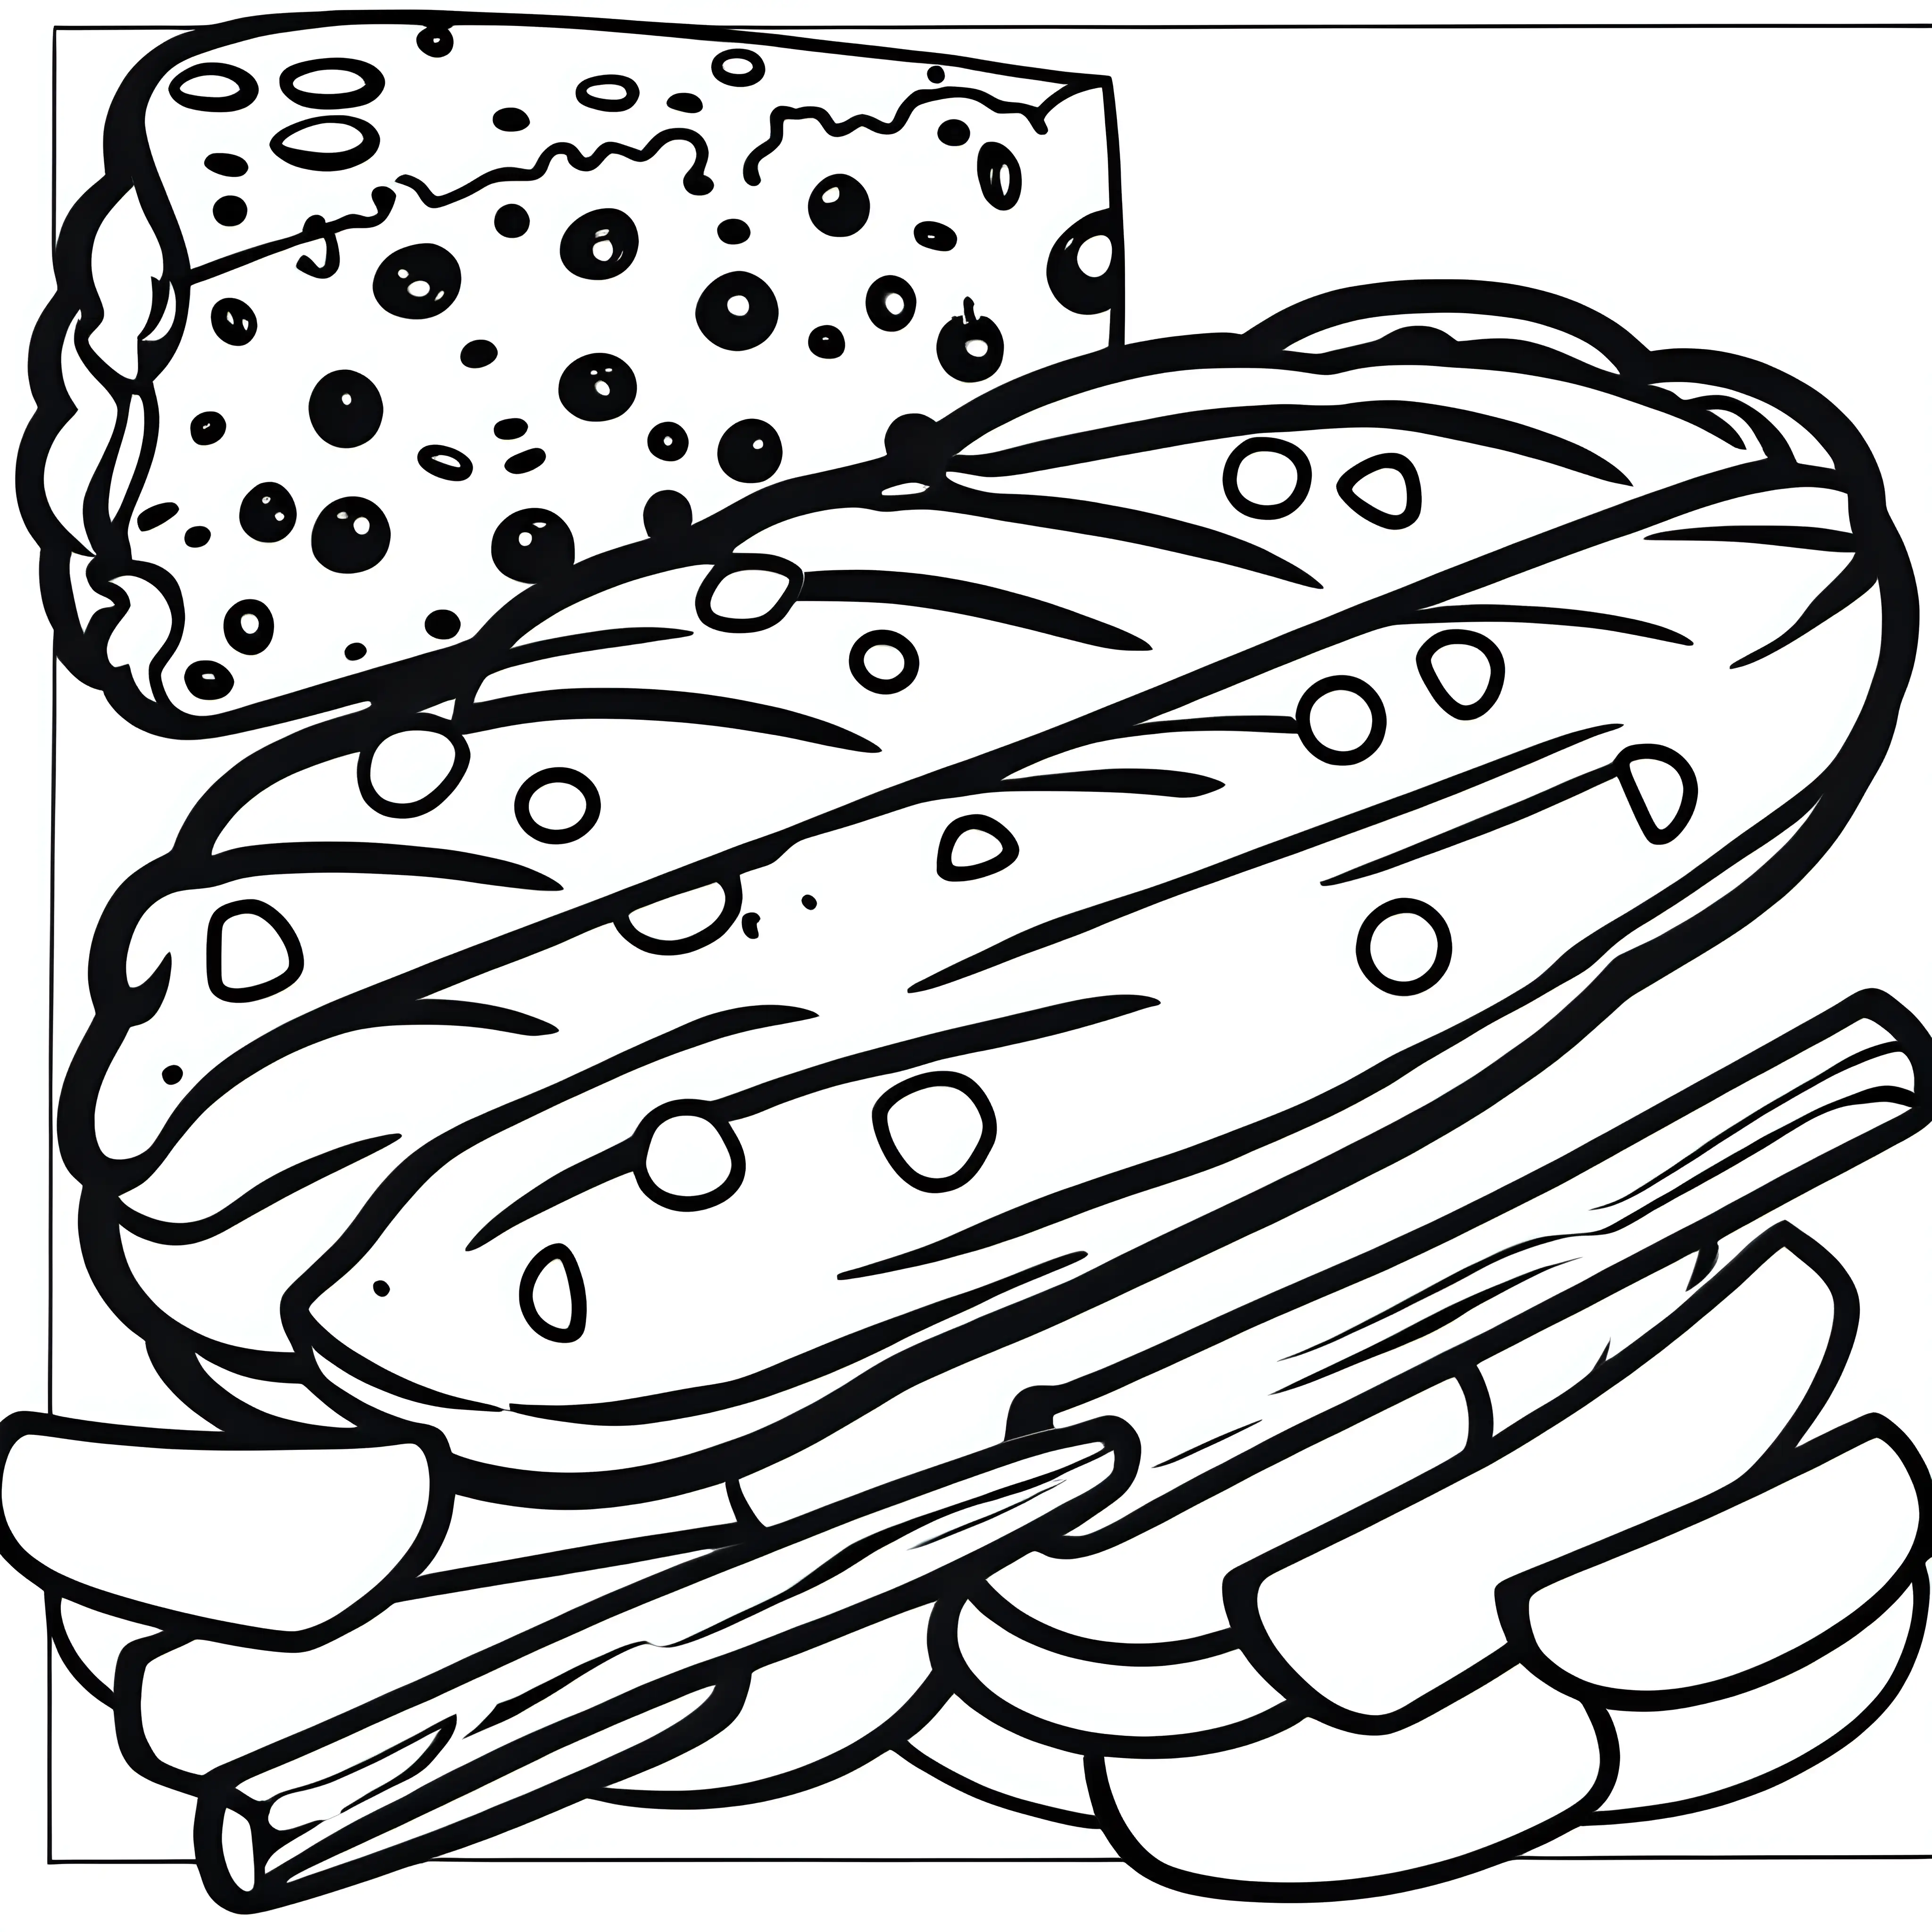 Baguette and Cheese coloring page